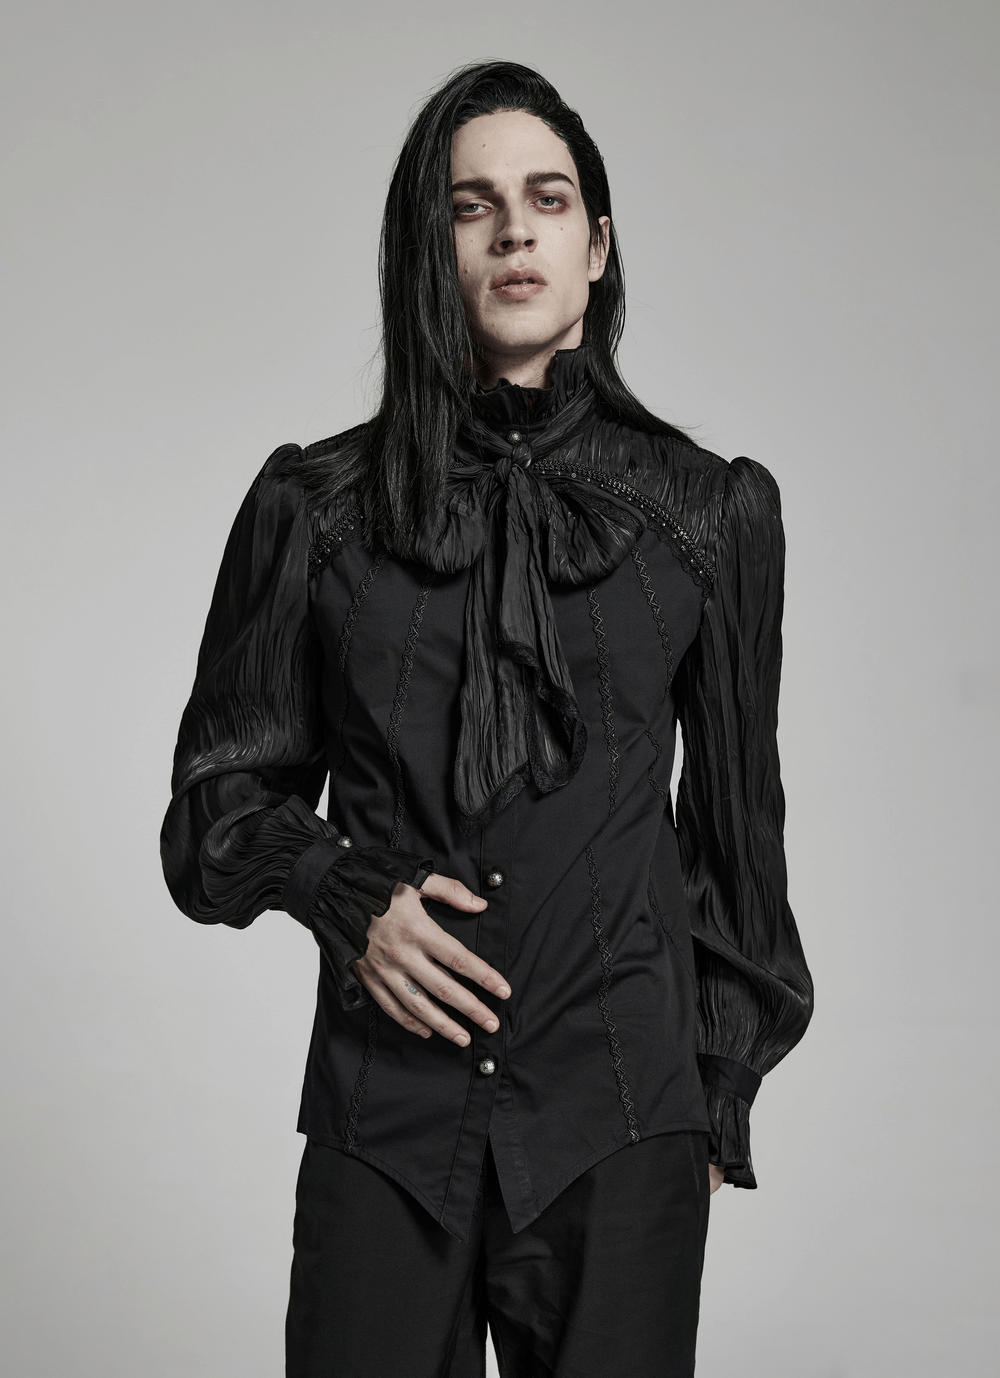 Victorian Gothic Pleated Lace-Up Shirt - HARD'N'HEAVY